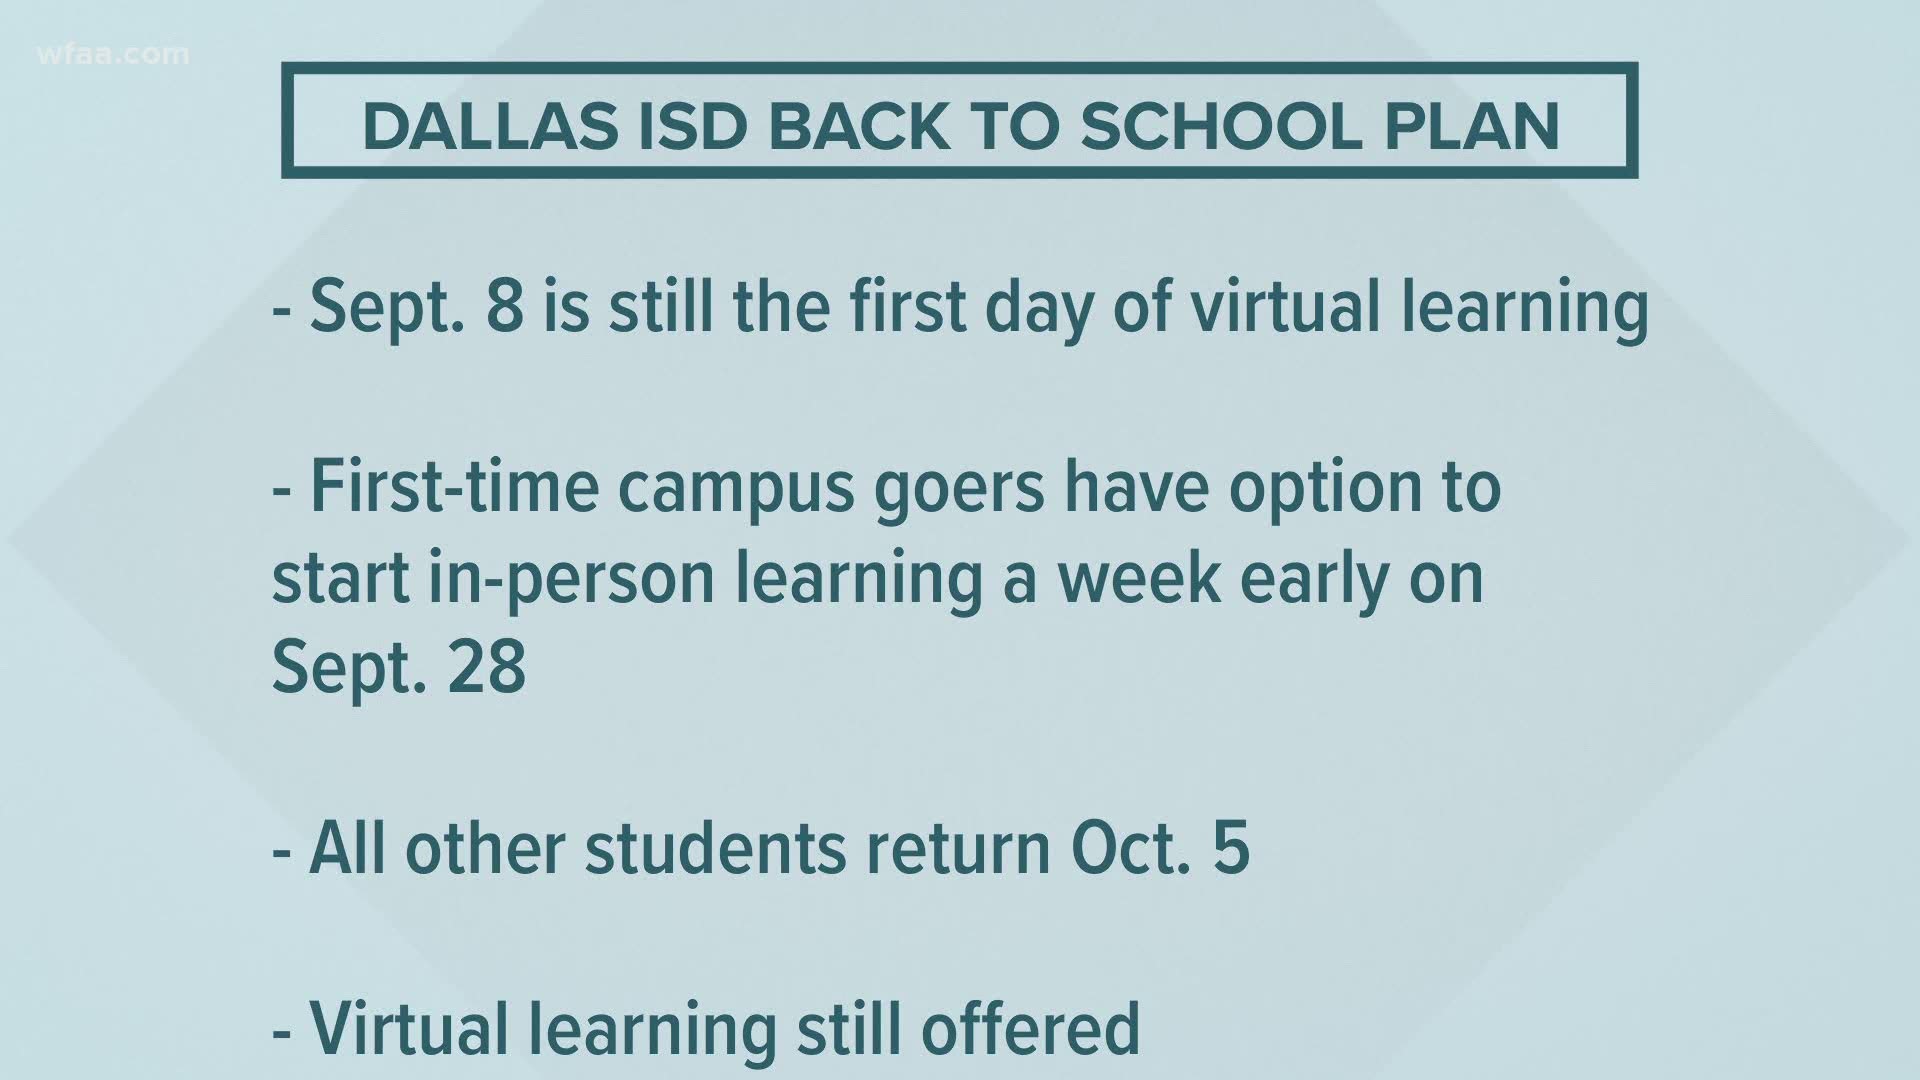 Dallas ISD releases new backtoschool plan, says some students can